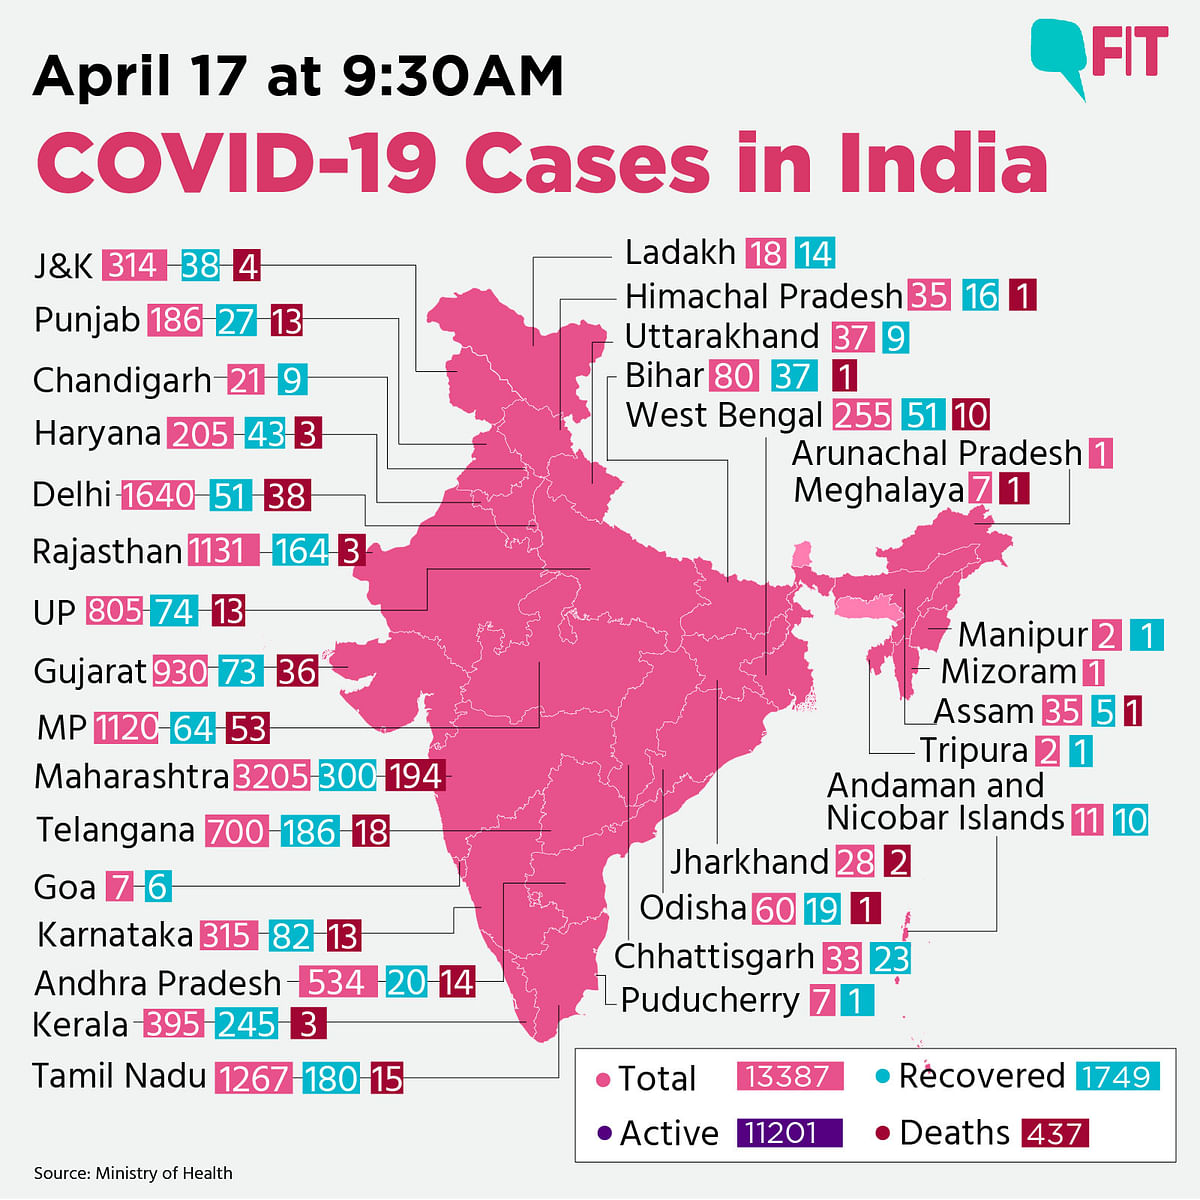 COVID-19 India Update: Total Number of Cases at 13,387